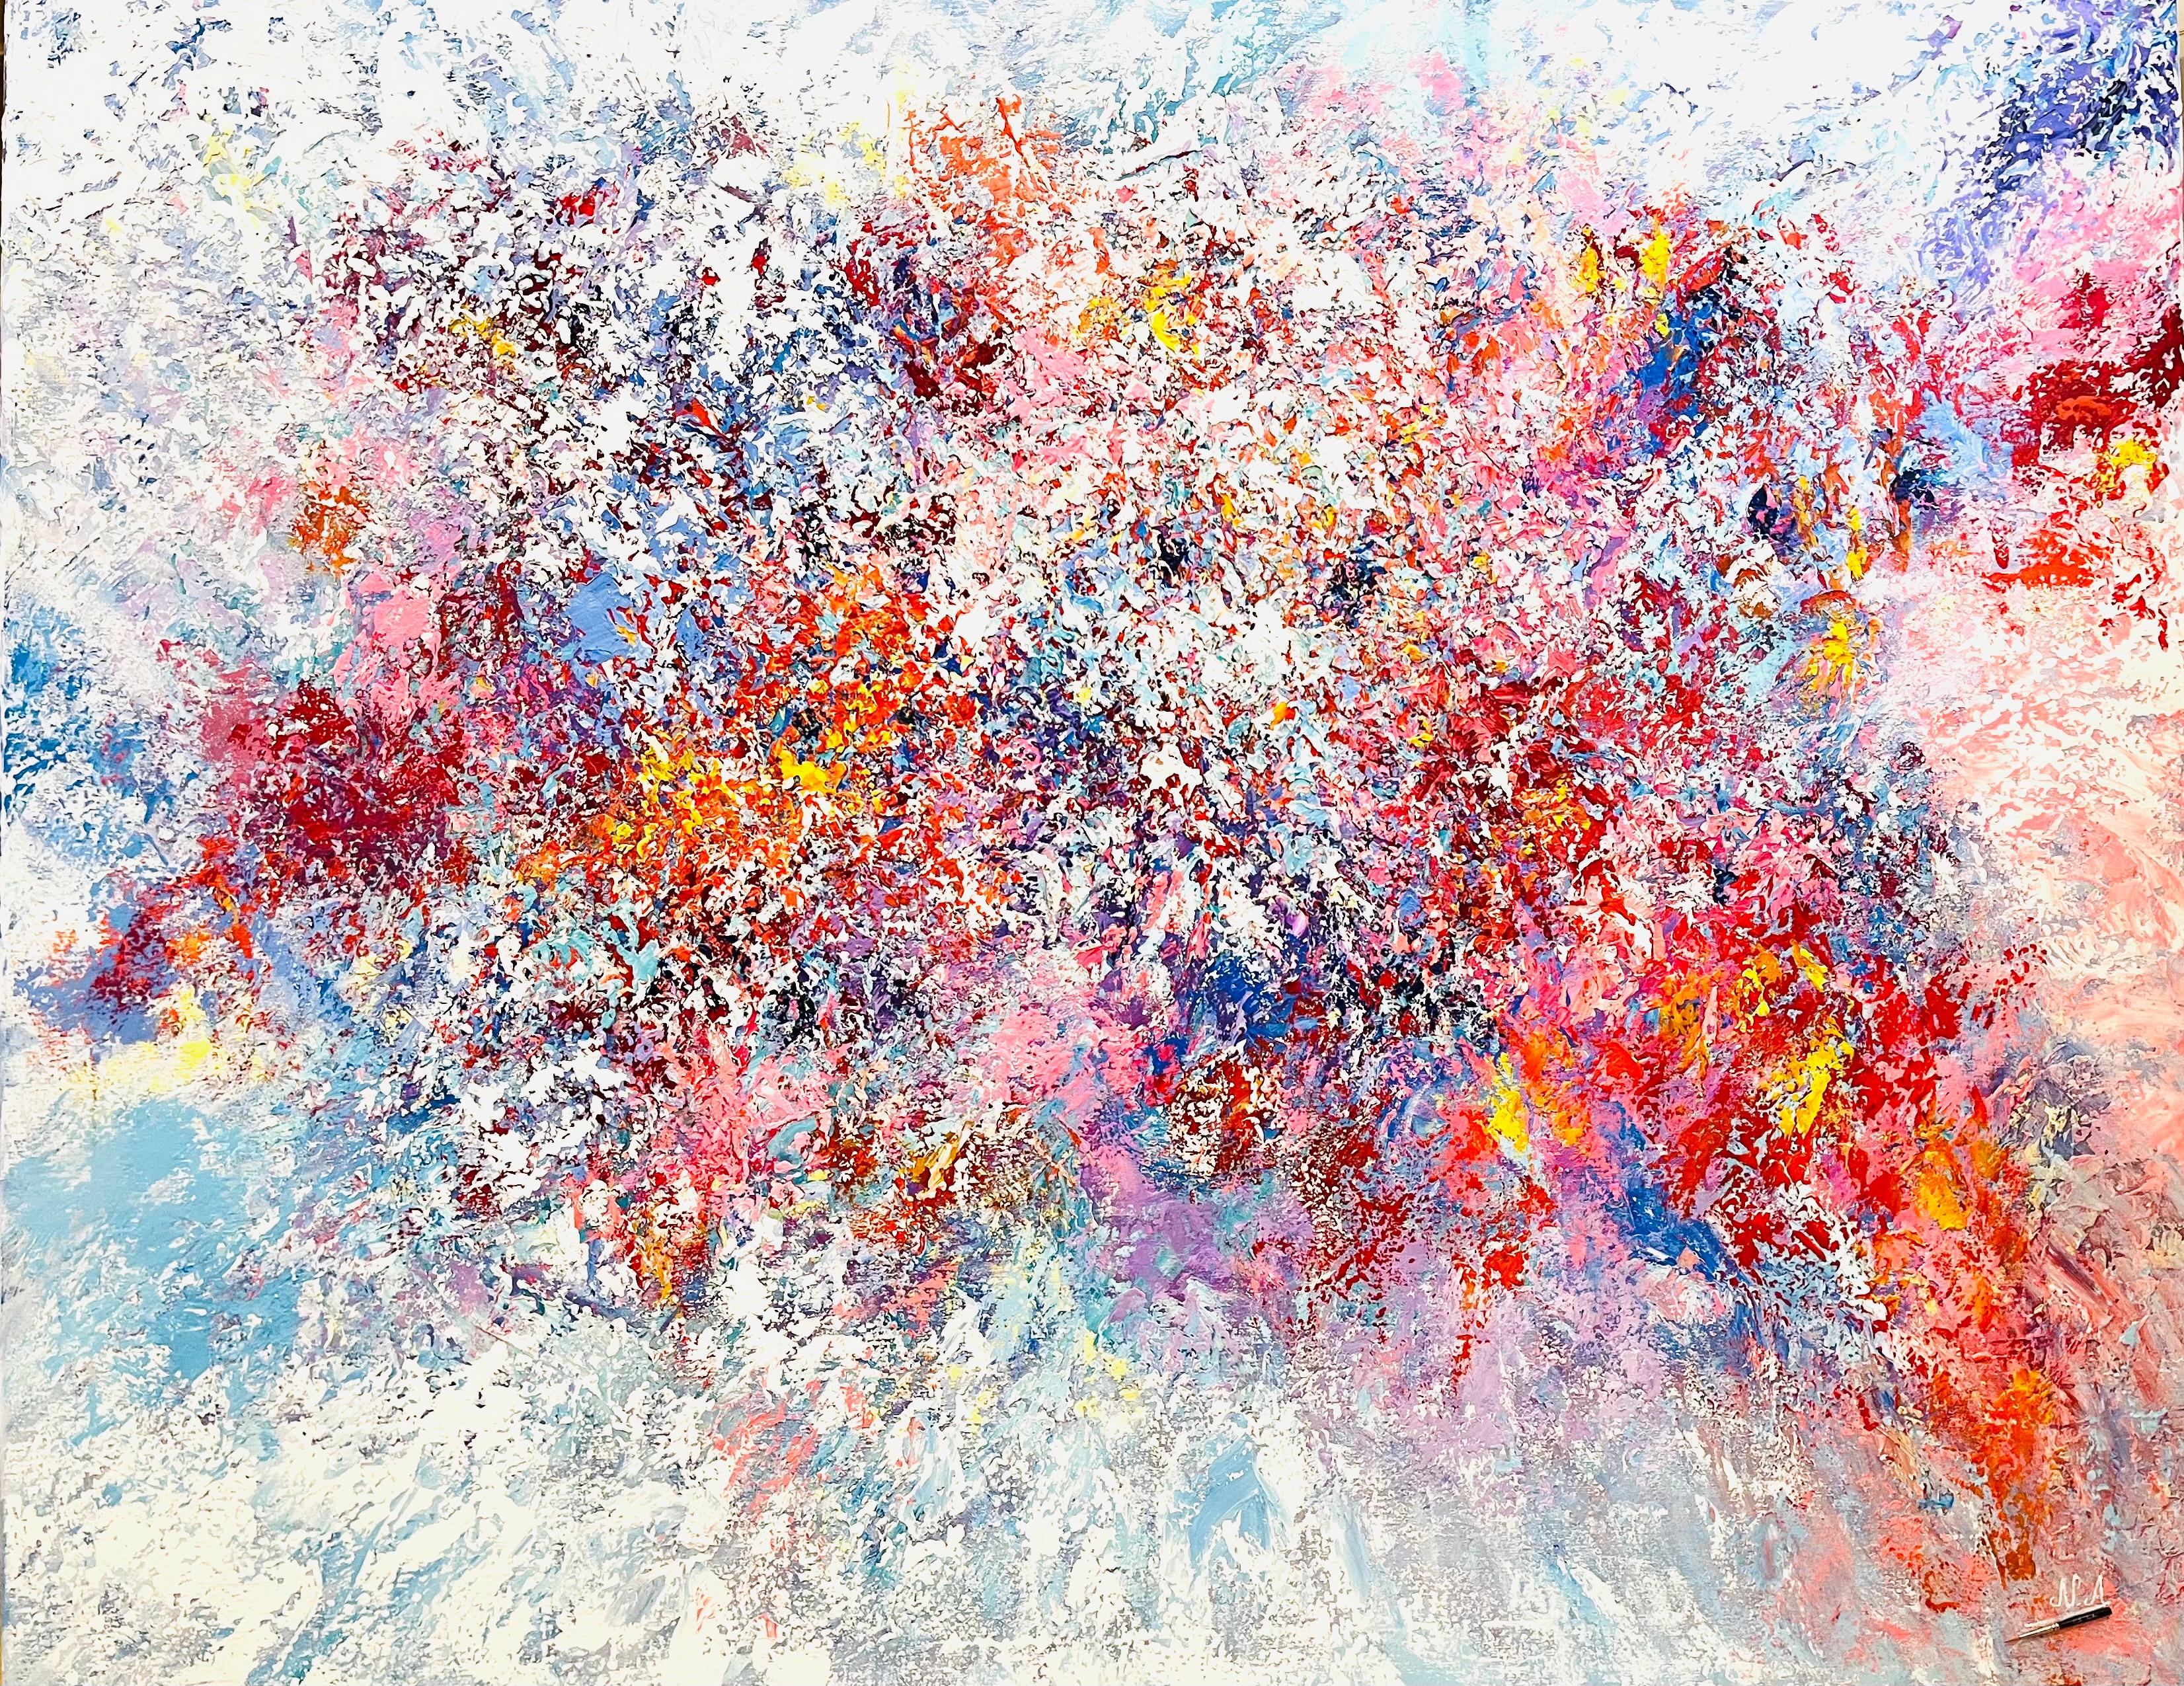 French Contemporary Art By Nicole Azoulay - Révélation 